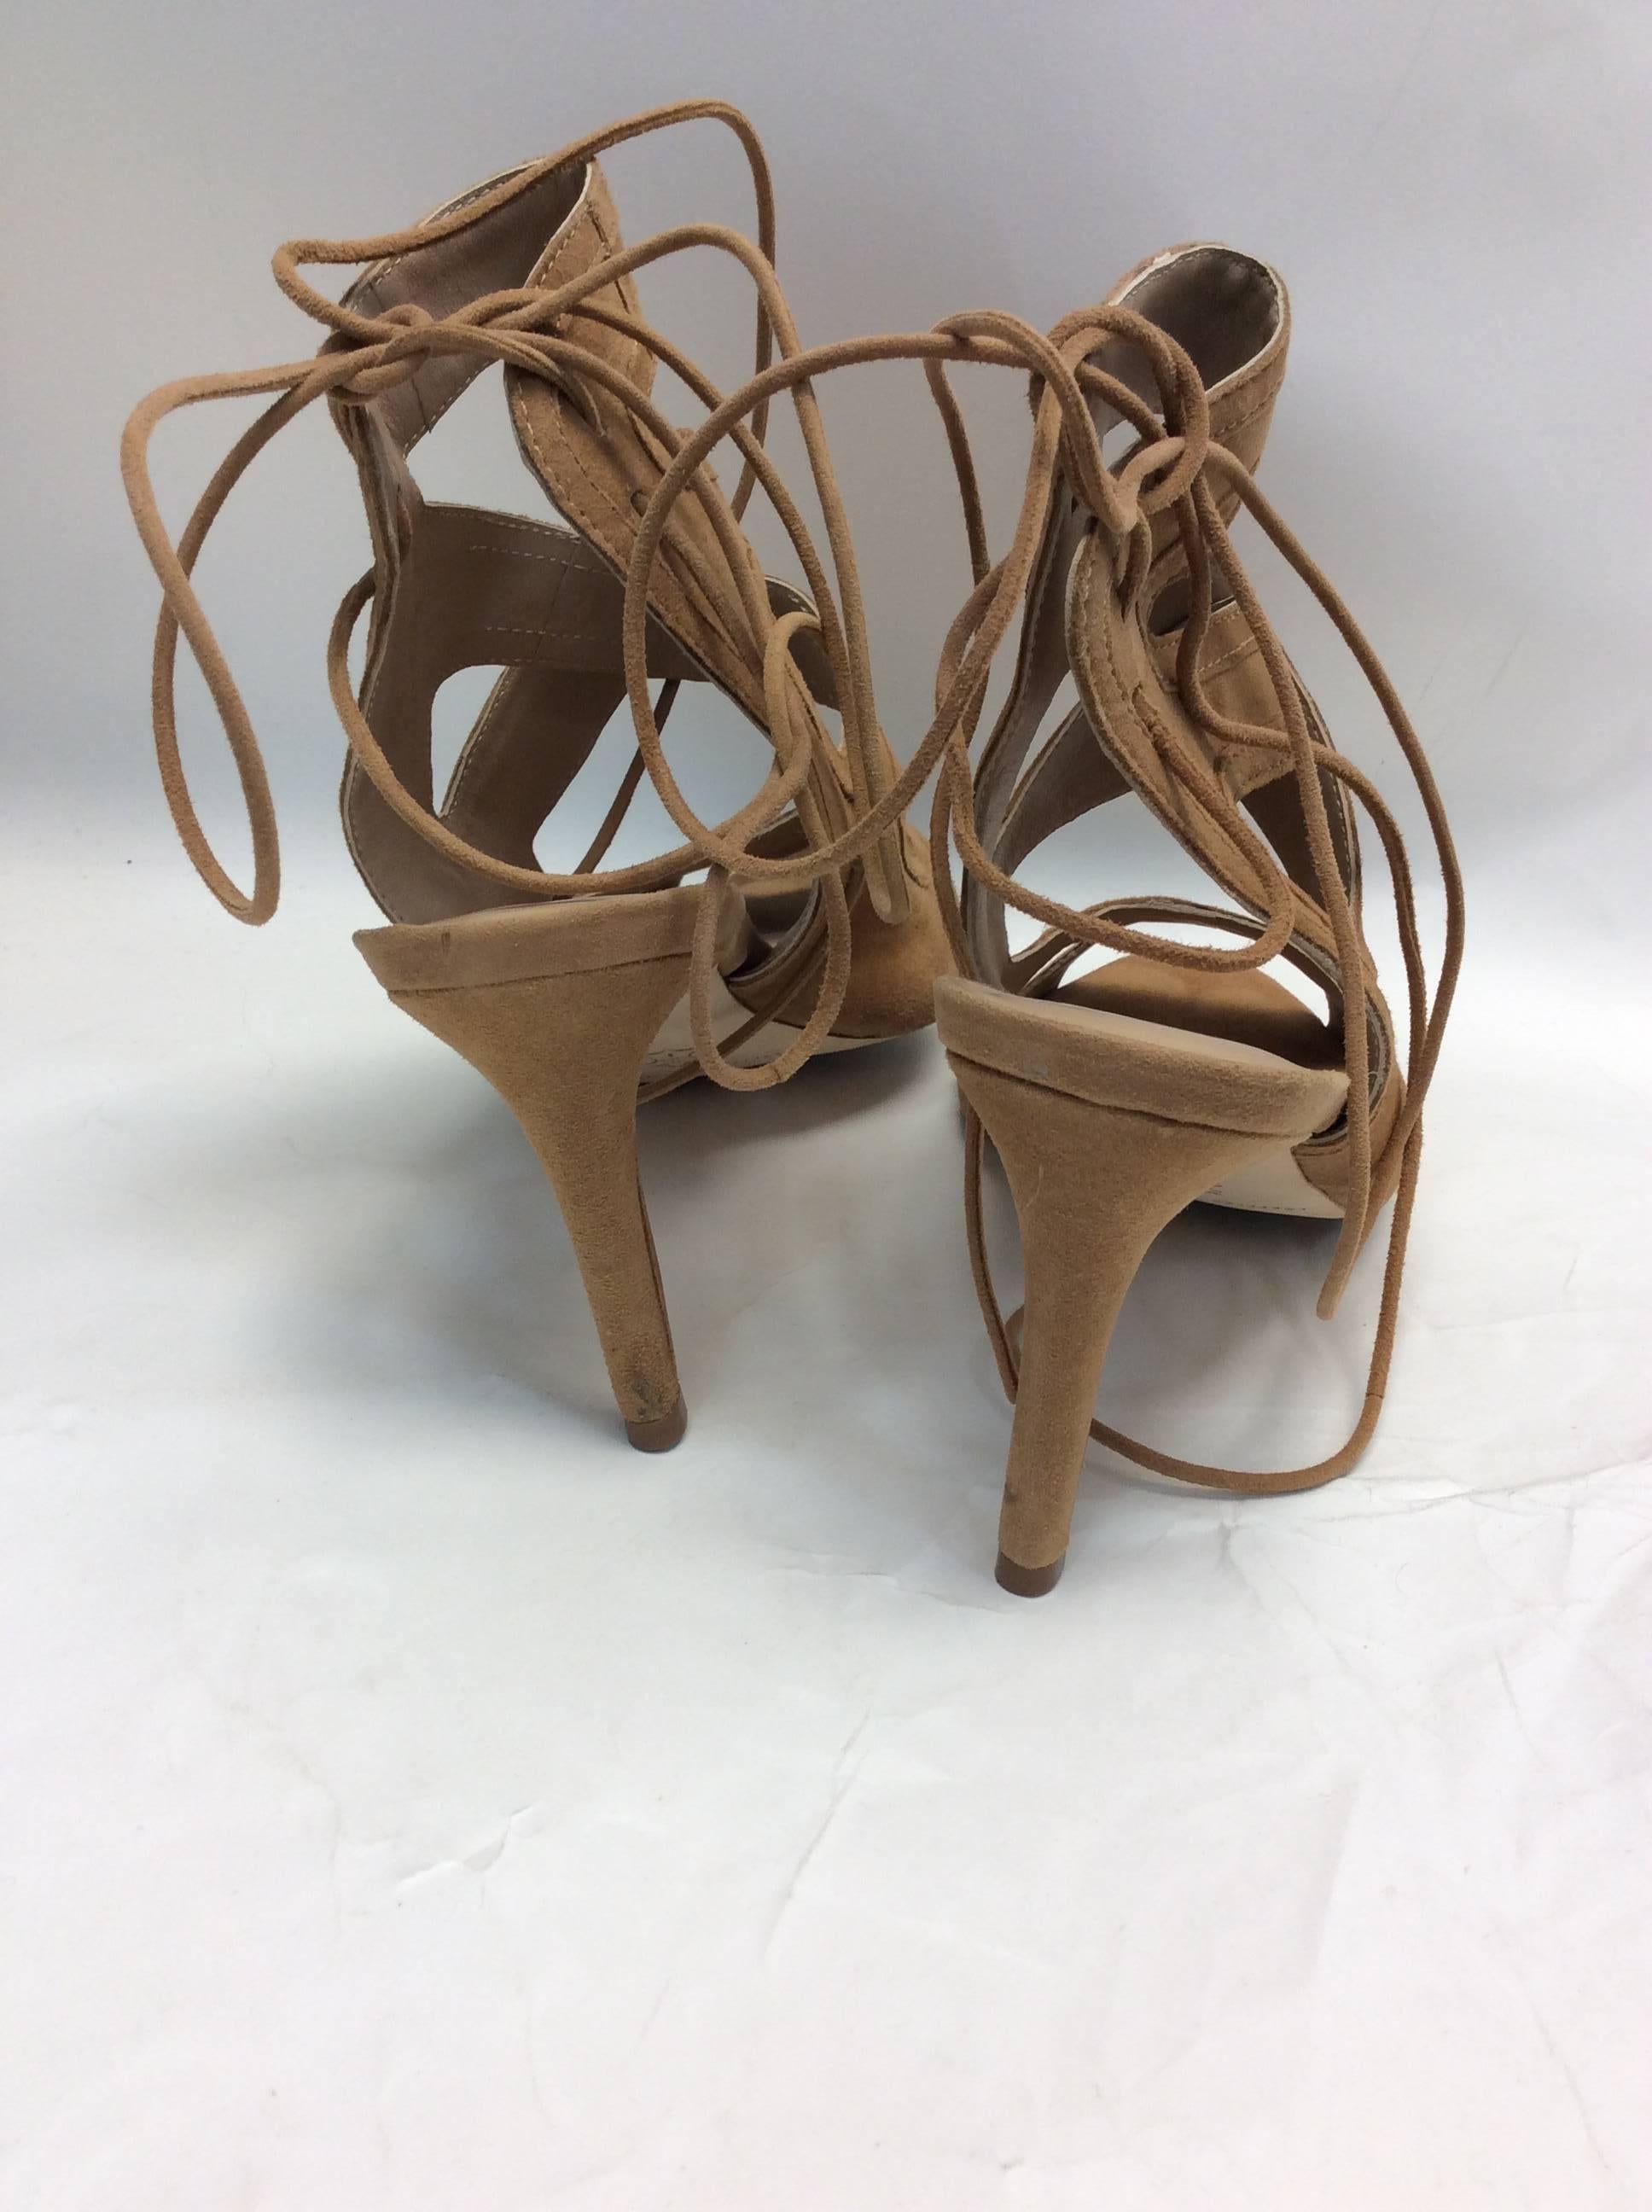 Loeffler Randall Tan Suede Lace Up Heels In Excellent Condition For Sale In Narberth, PA